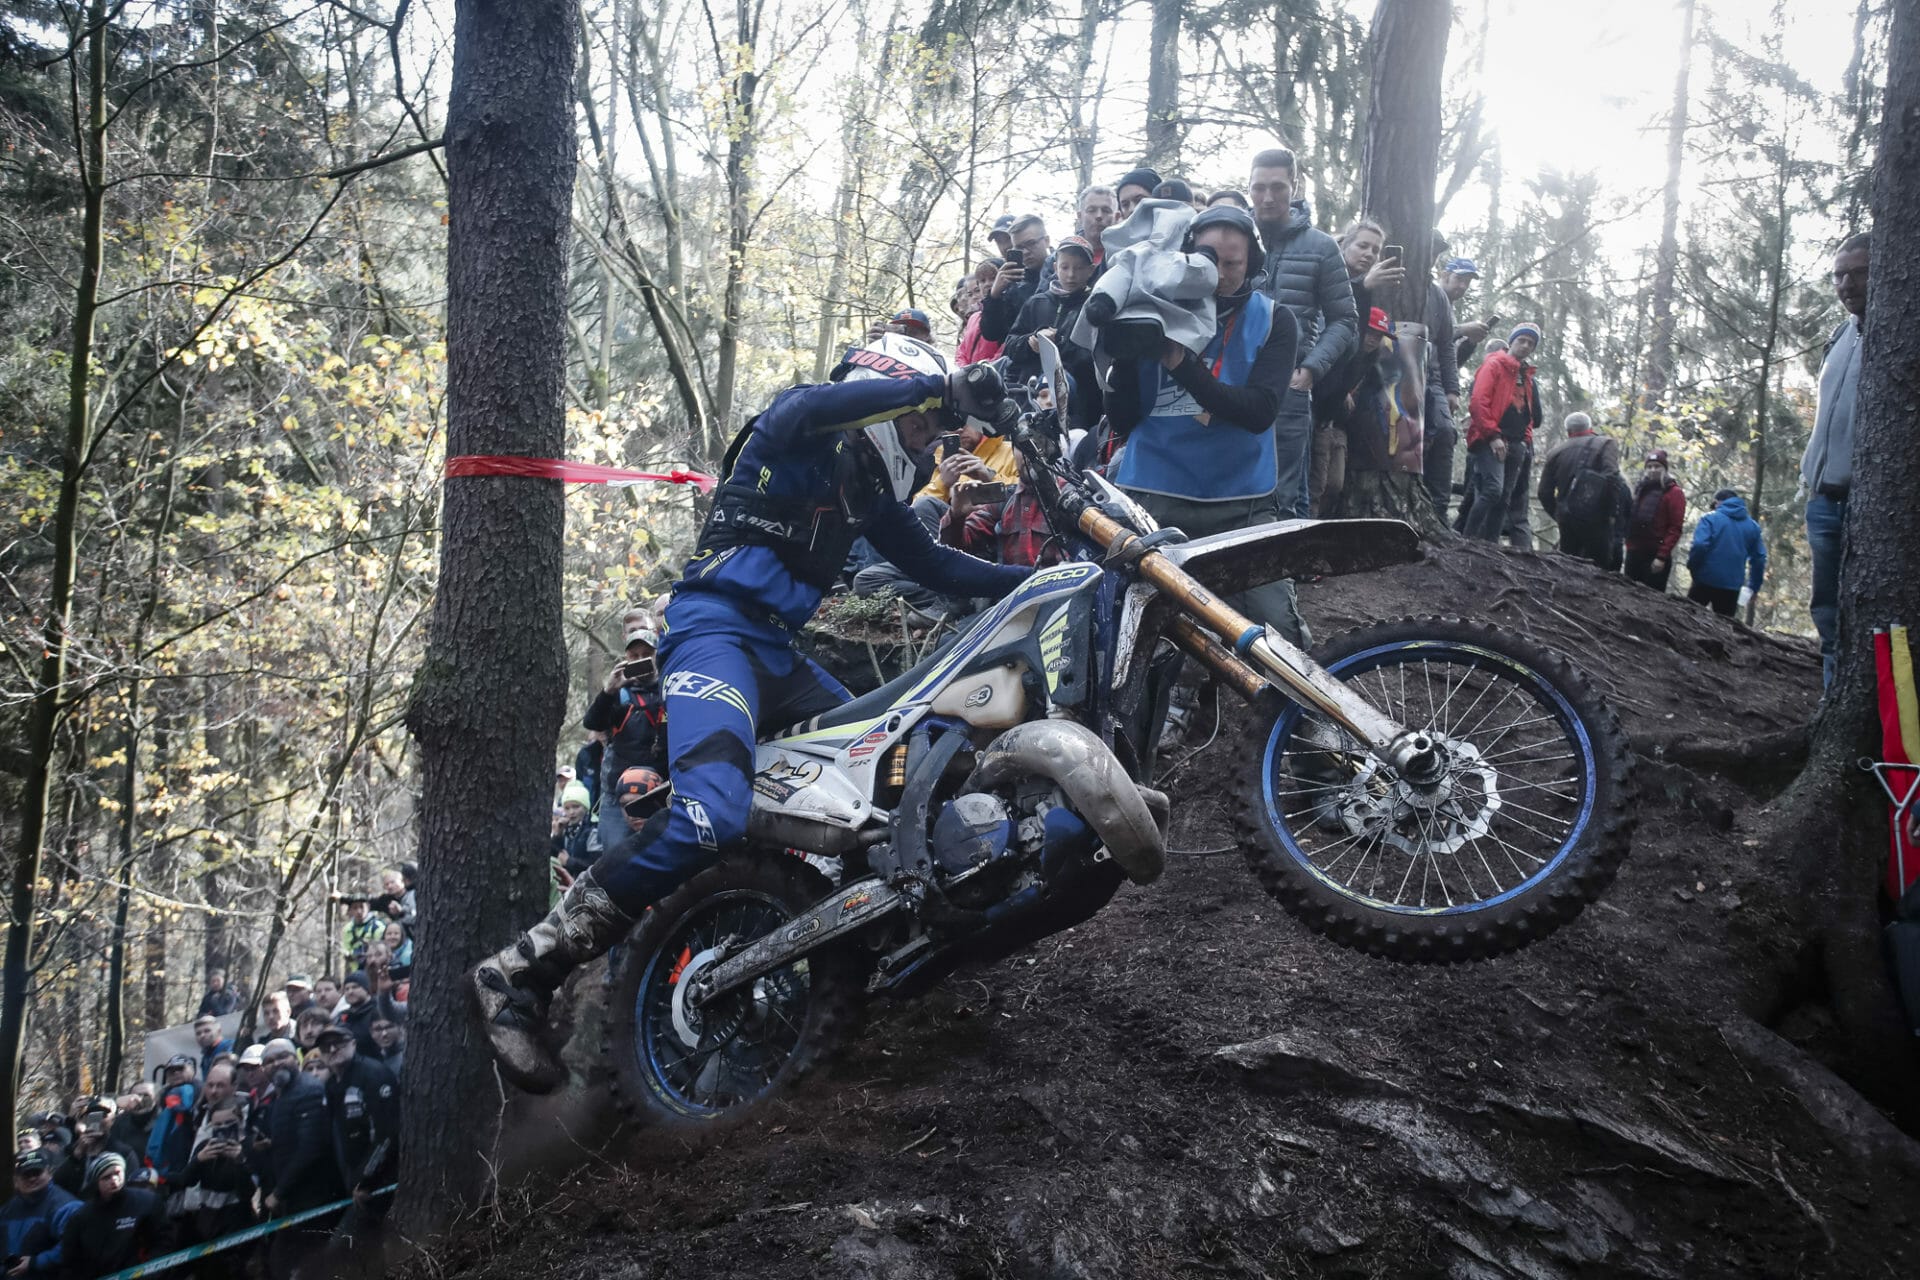 WESS becomes FIM Hard Enduro World Championship
- also in the MOTORCYCLES.NEWS APP